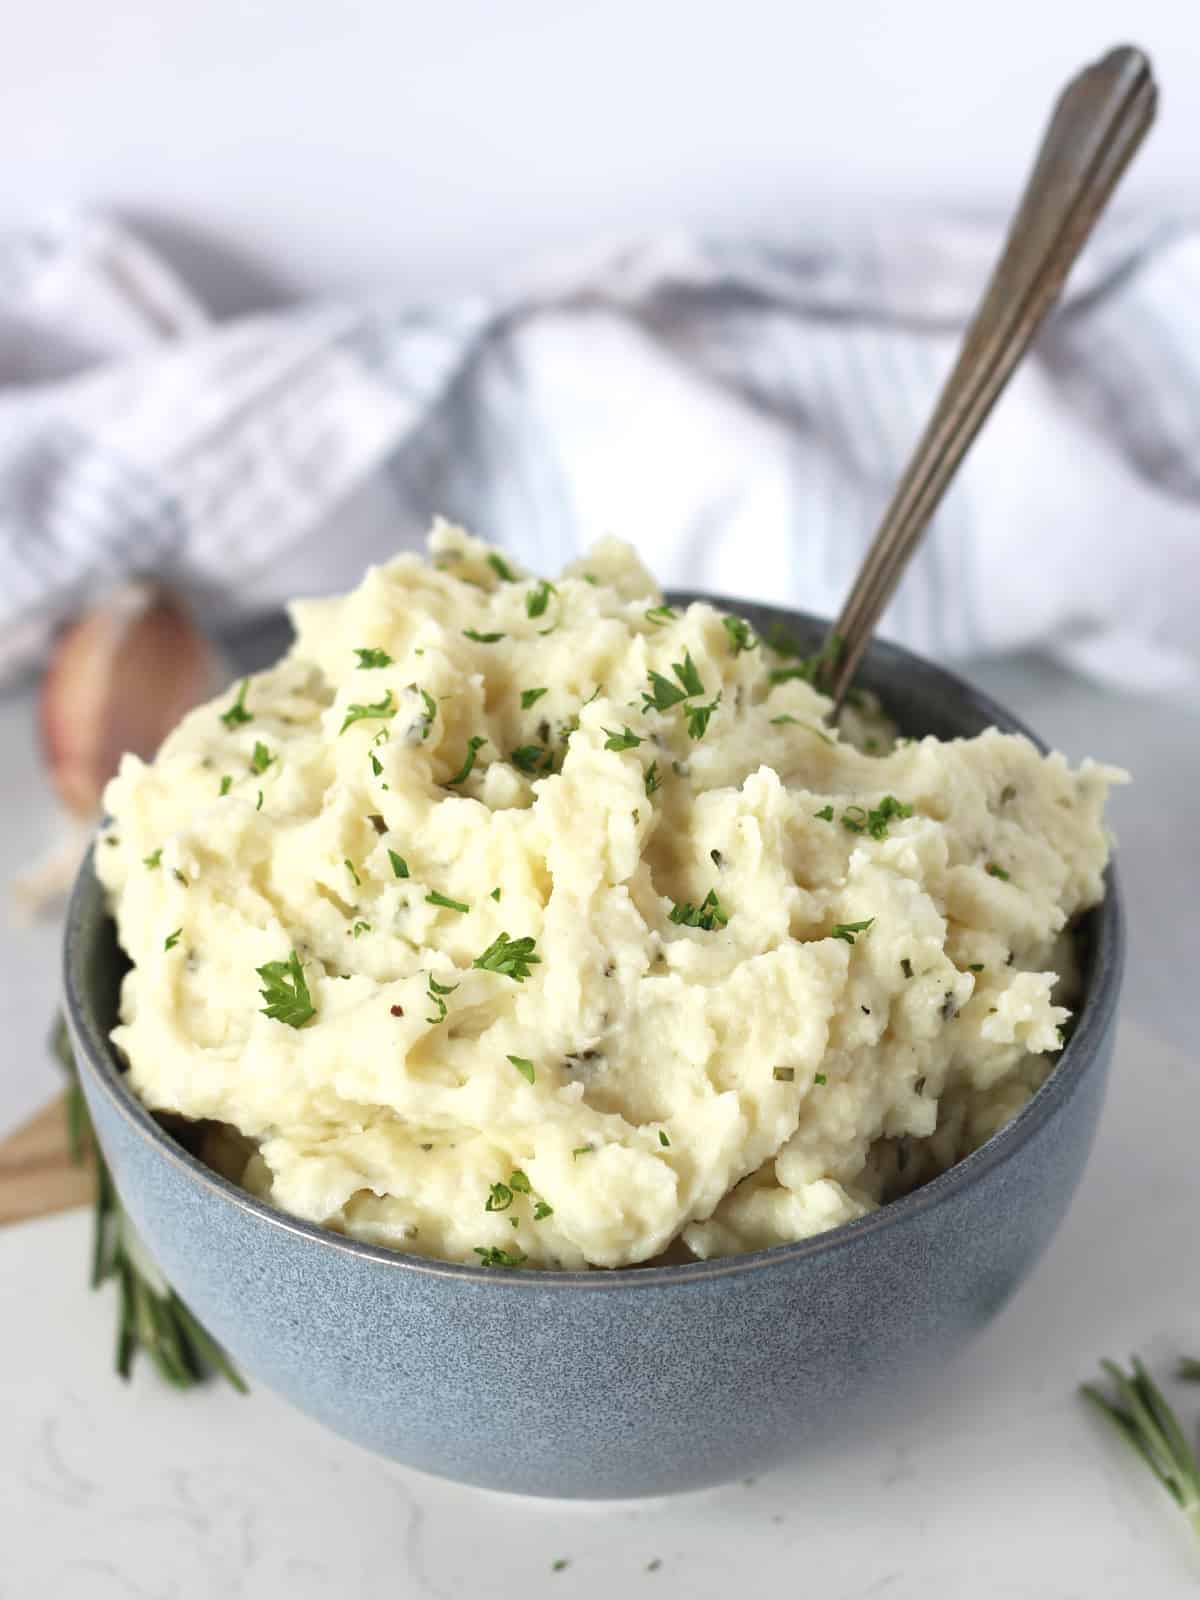 Rosemary garlic mashed potatoes in a blue bowl with a spoon.